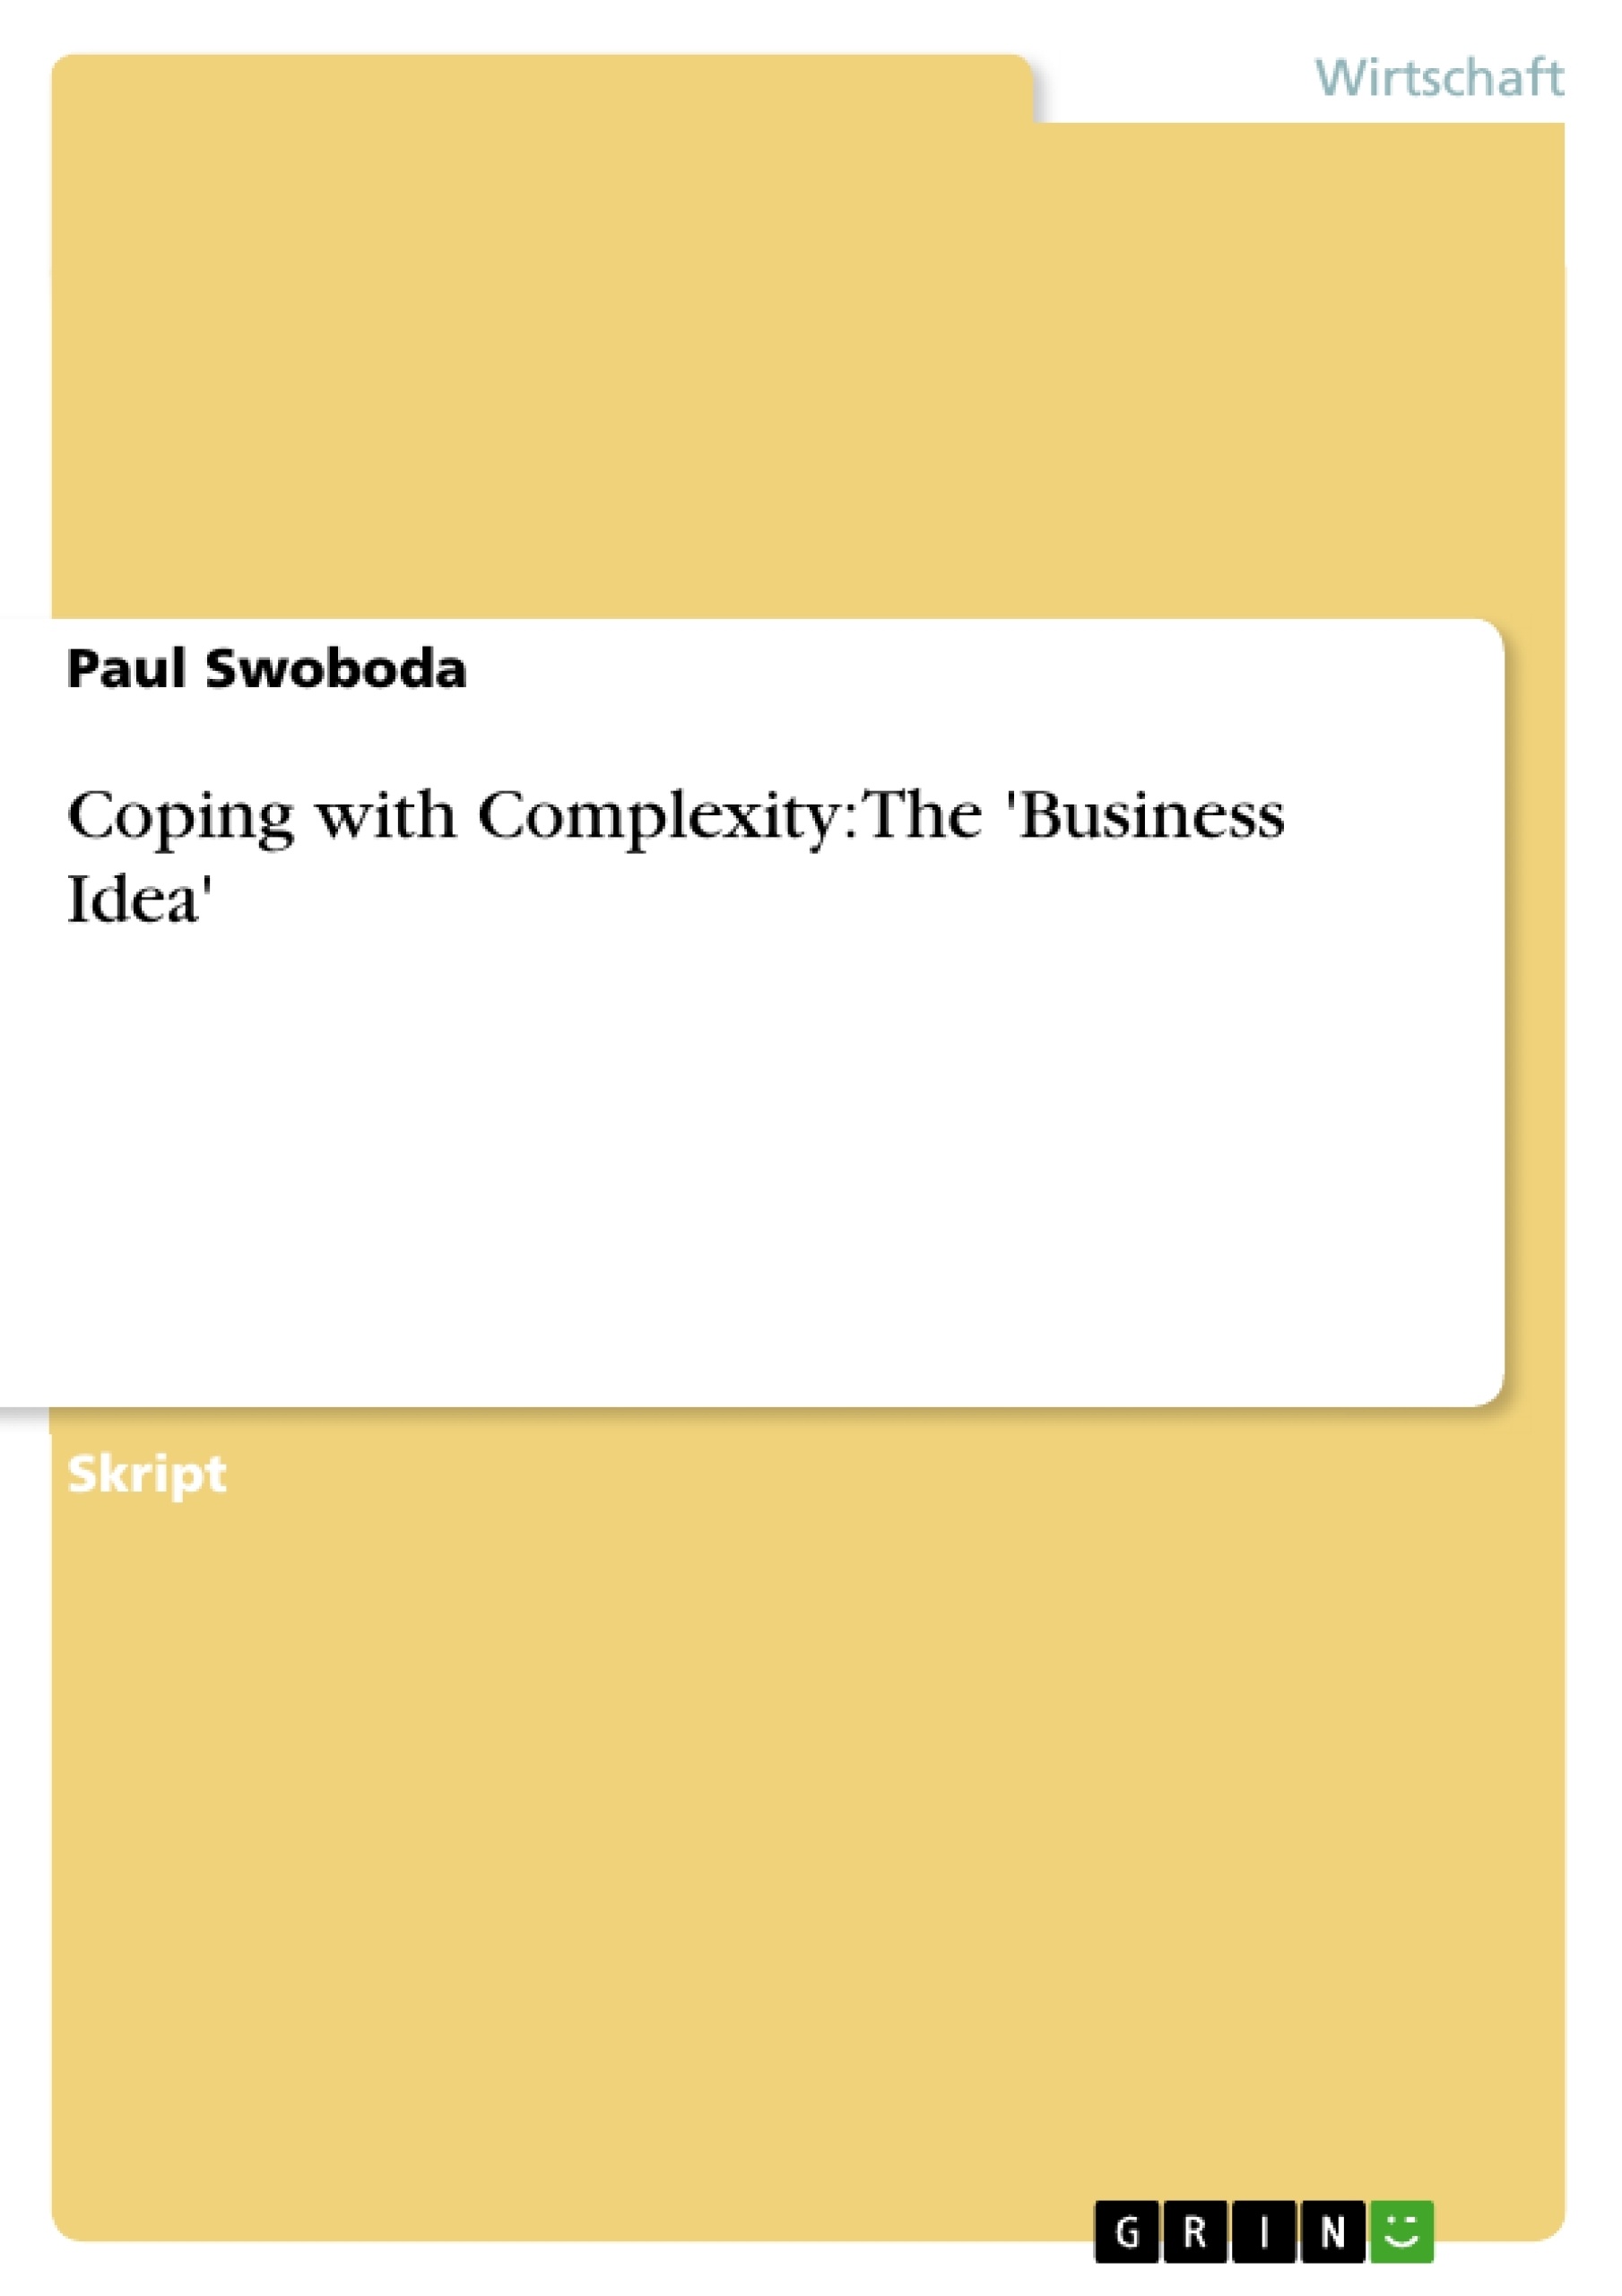 Titel: Coping with Complexity: The 'Business Idea'